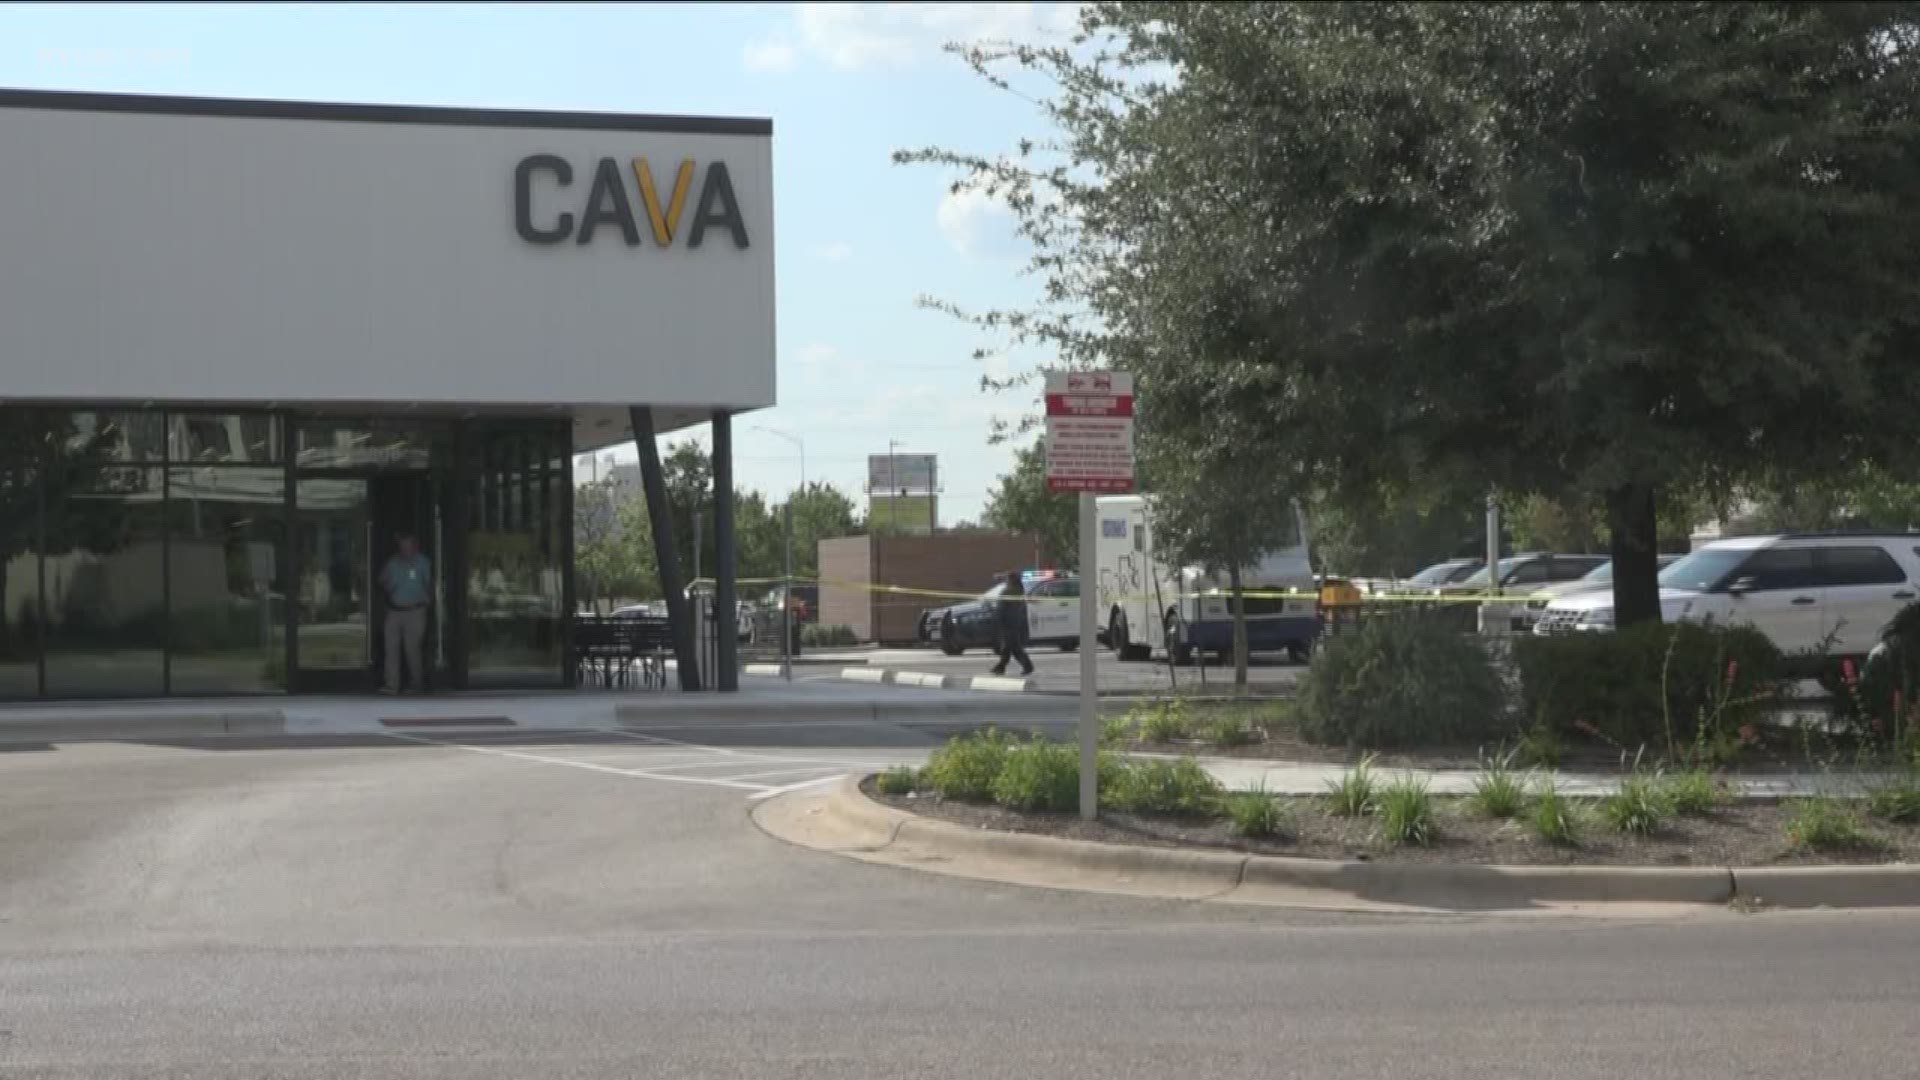 Officers were collecting evidence from an armored truck outside Cava, the Mediterranian restaurant near Braker Lane.